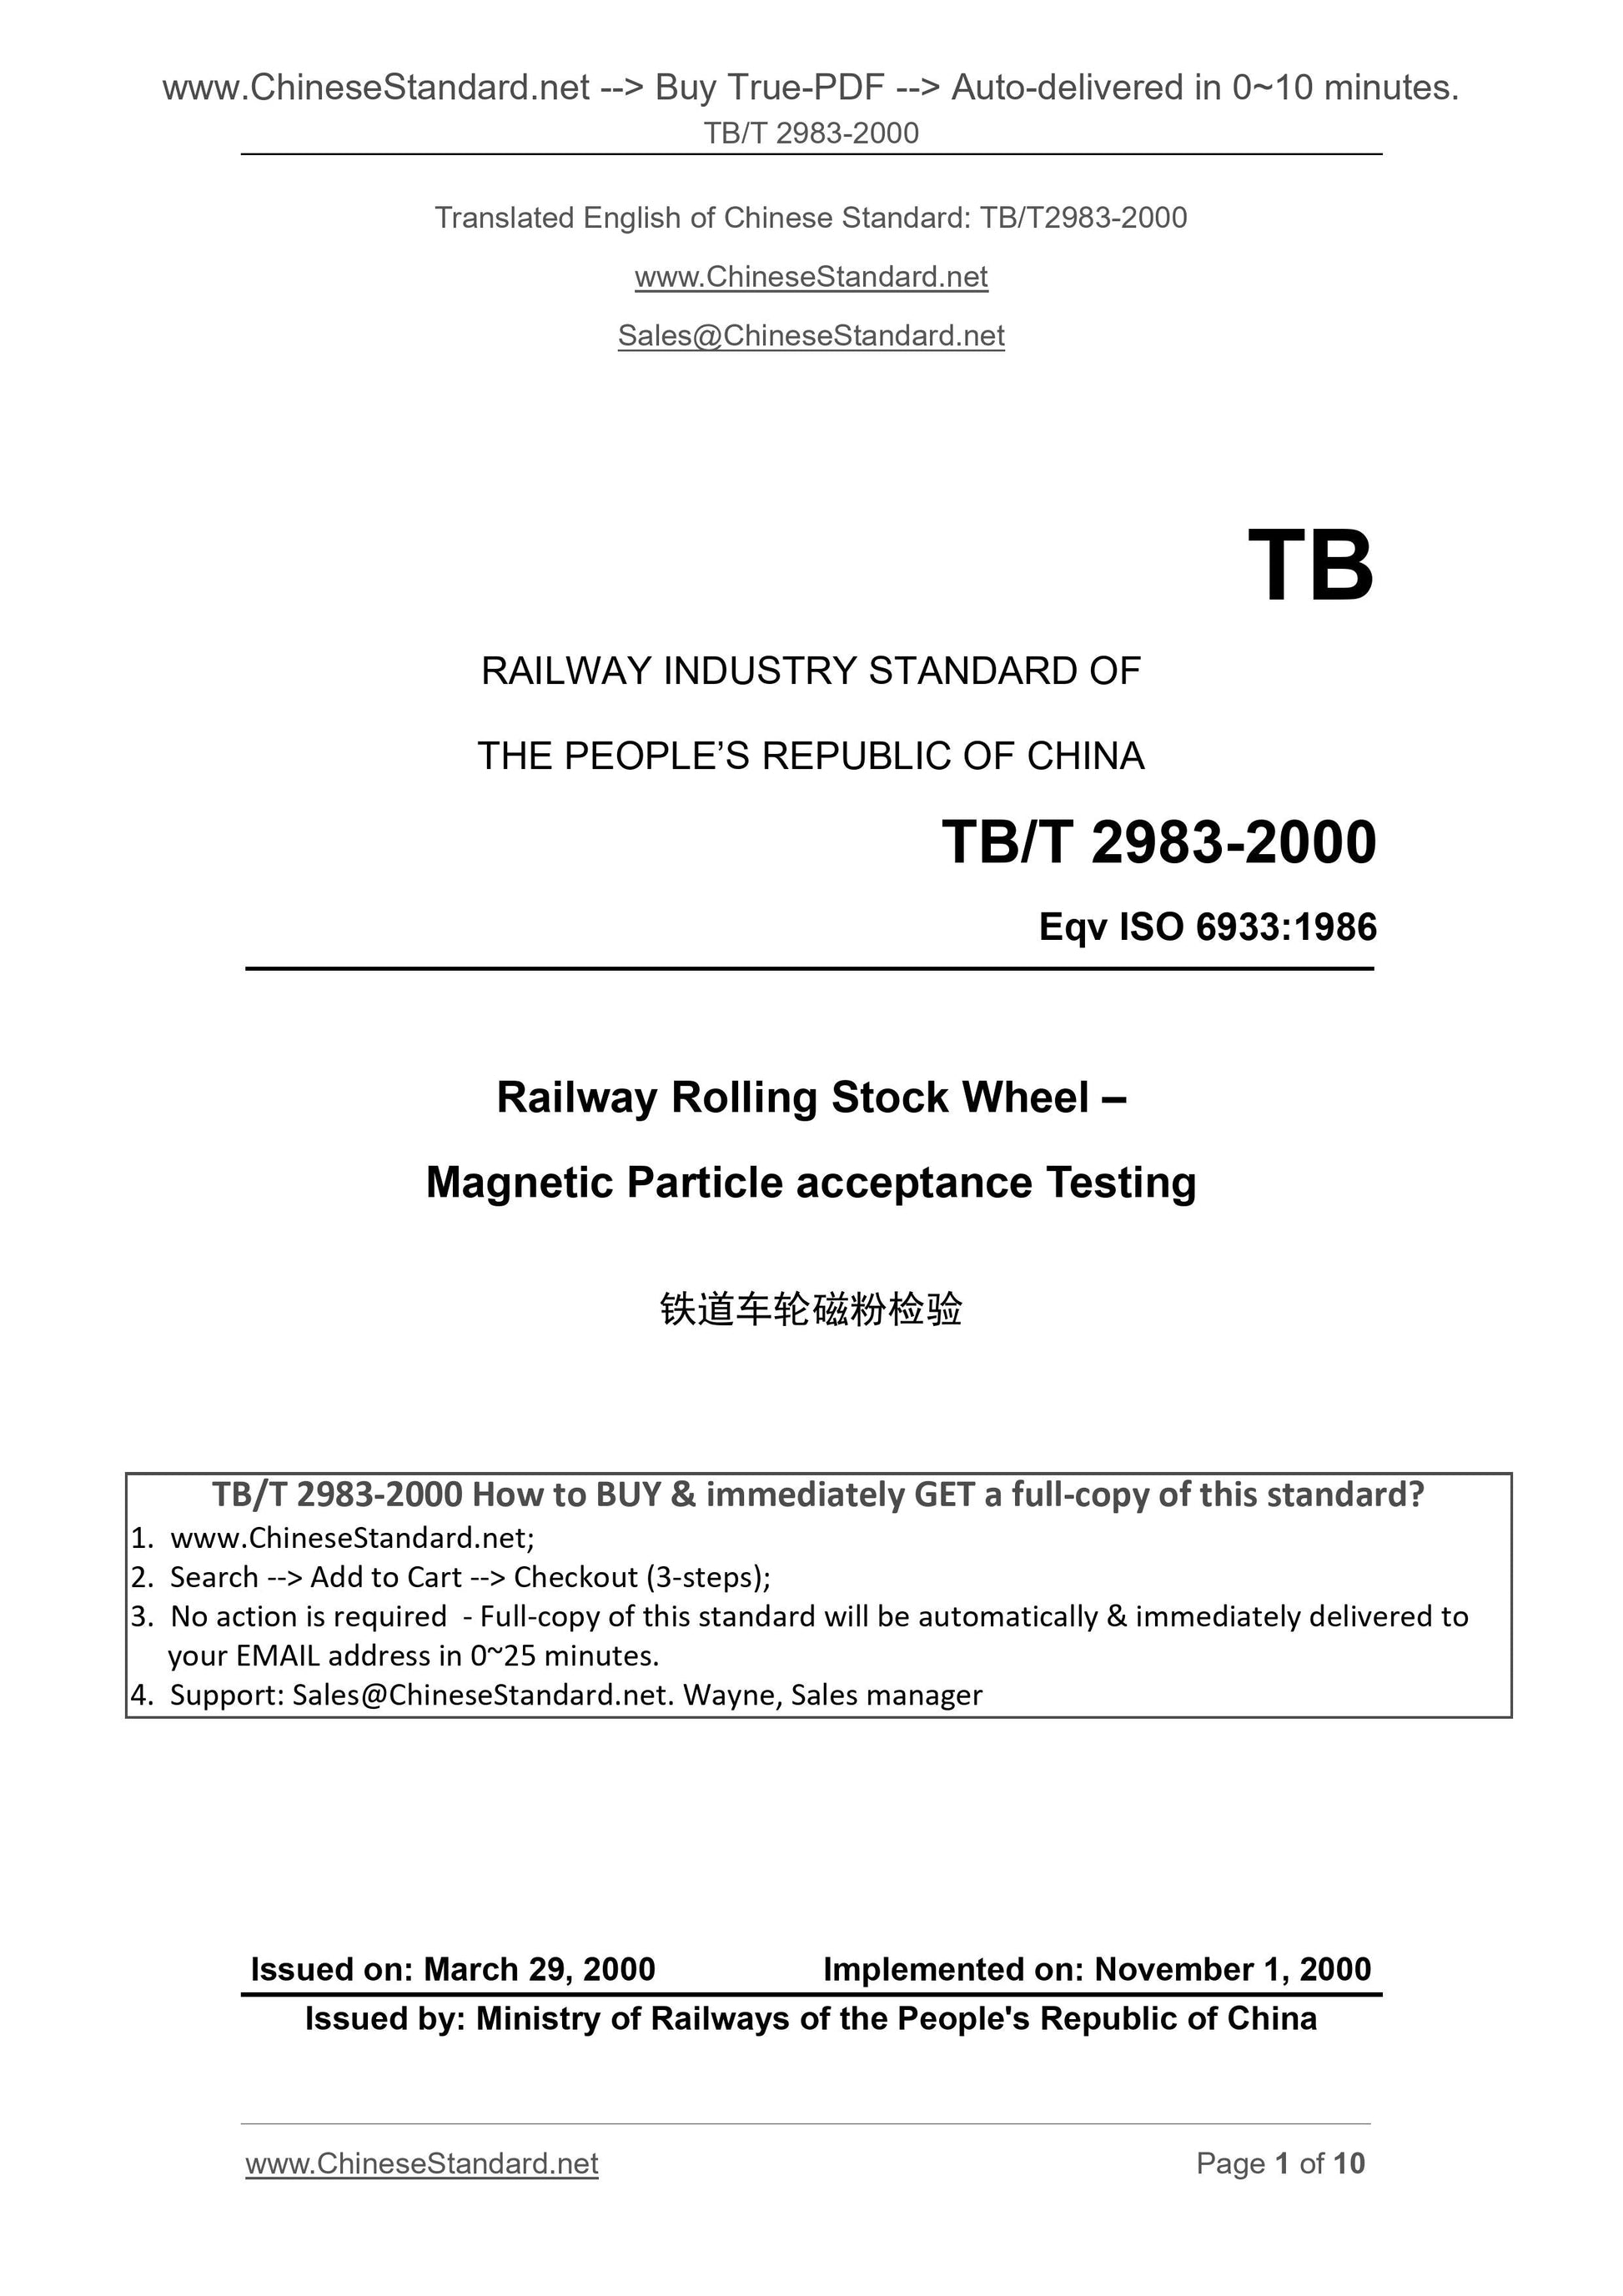 TB/T 2983-2000 Page 1